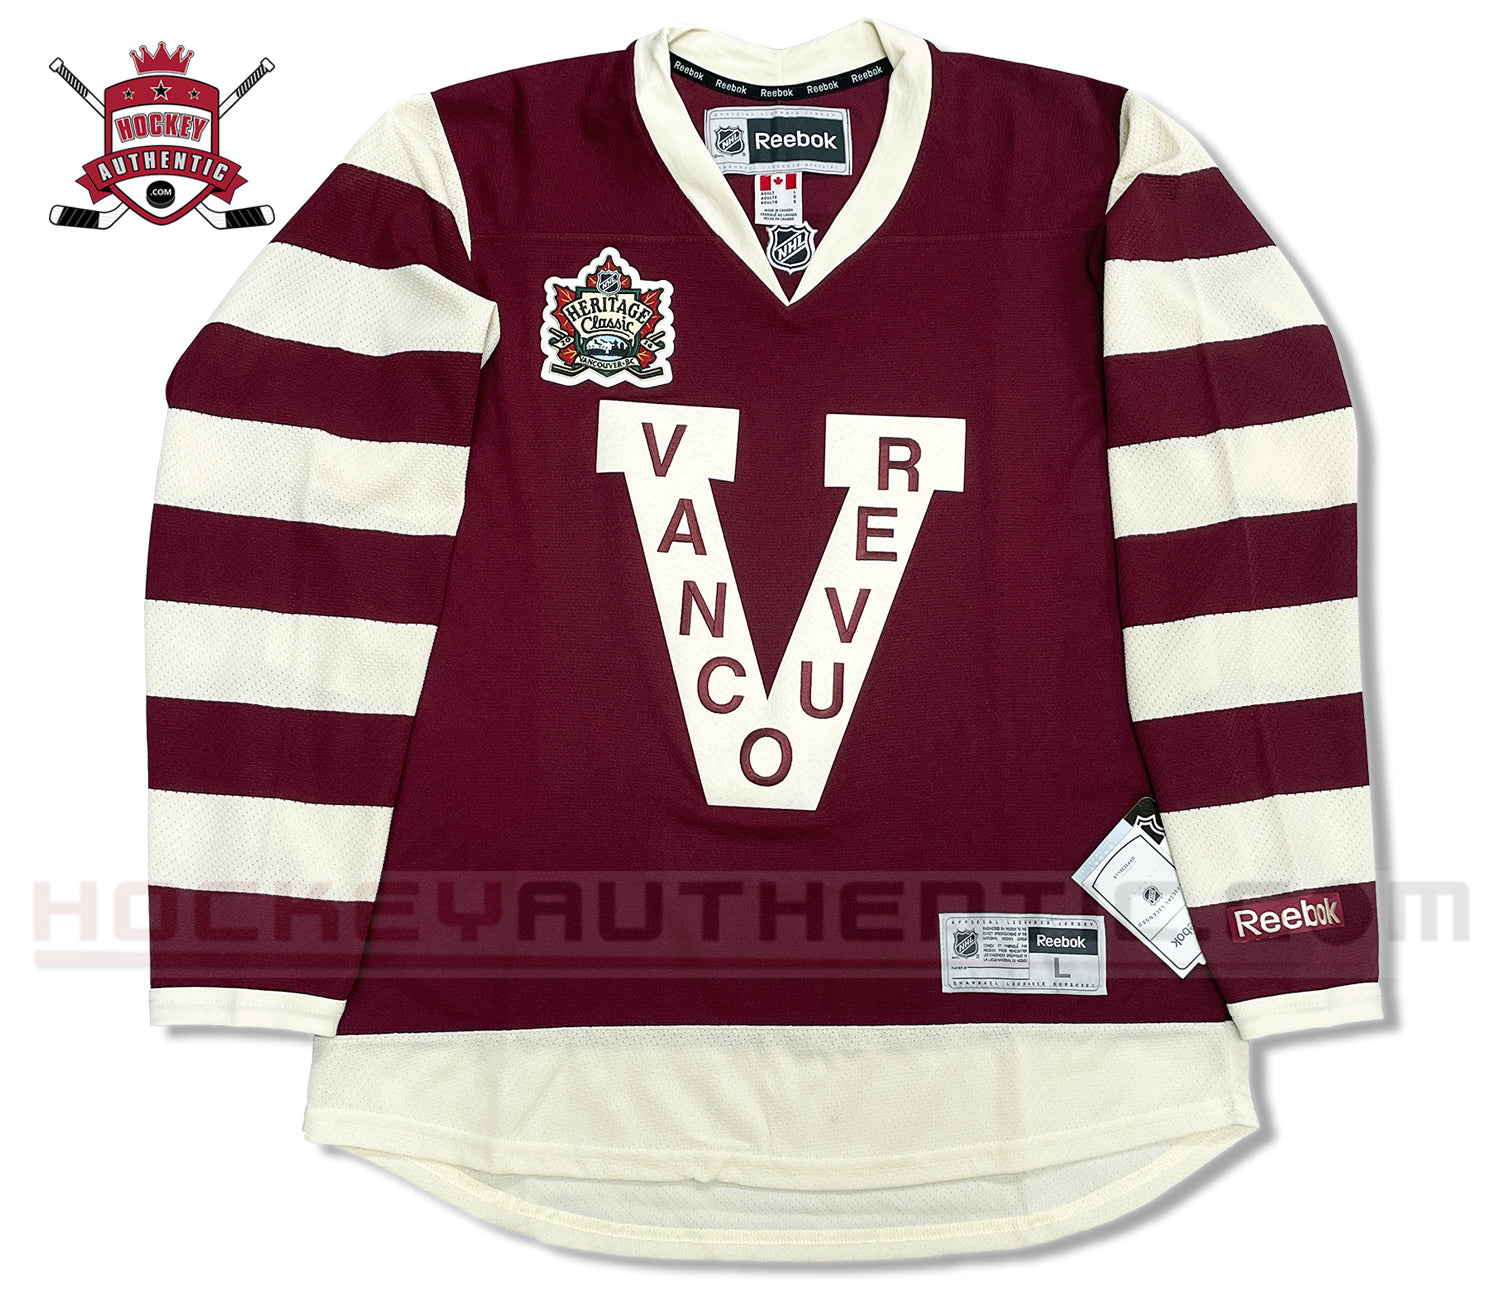 Canucks to celebrate Stanley Cup, wear Millionaires jerseys